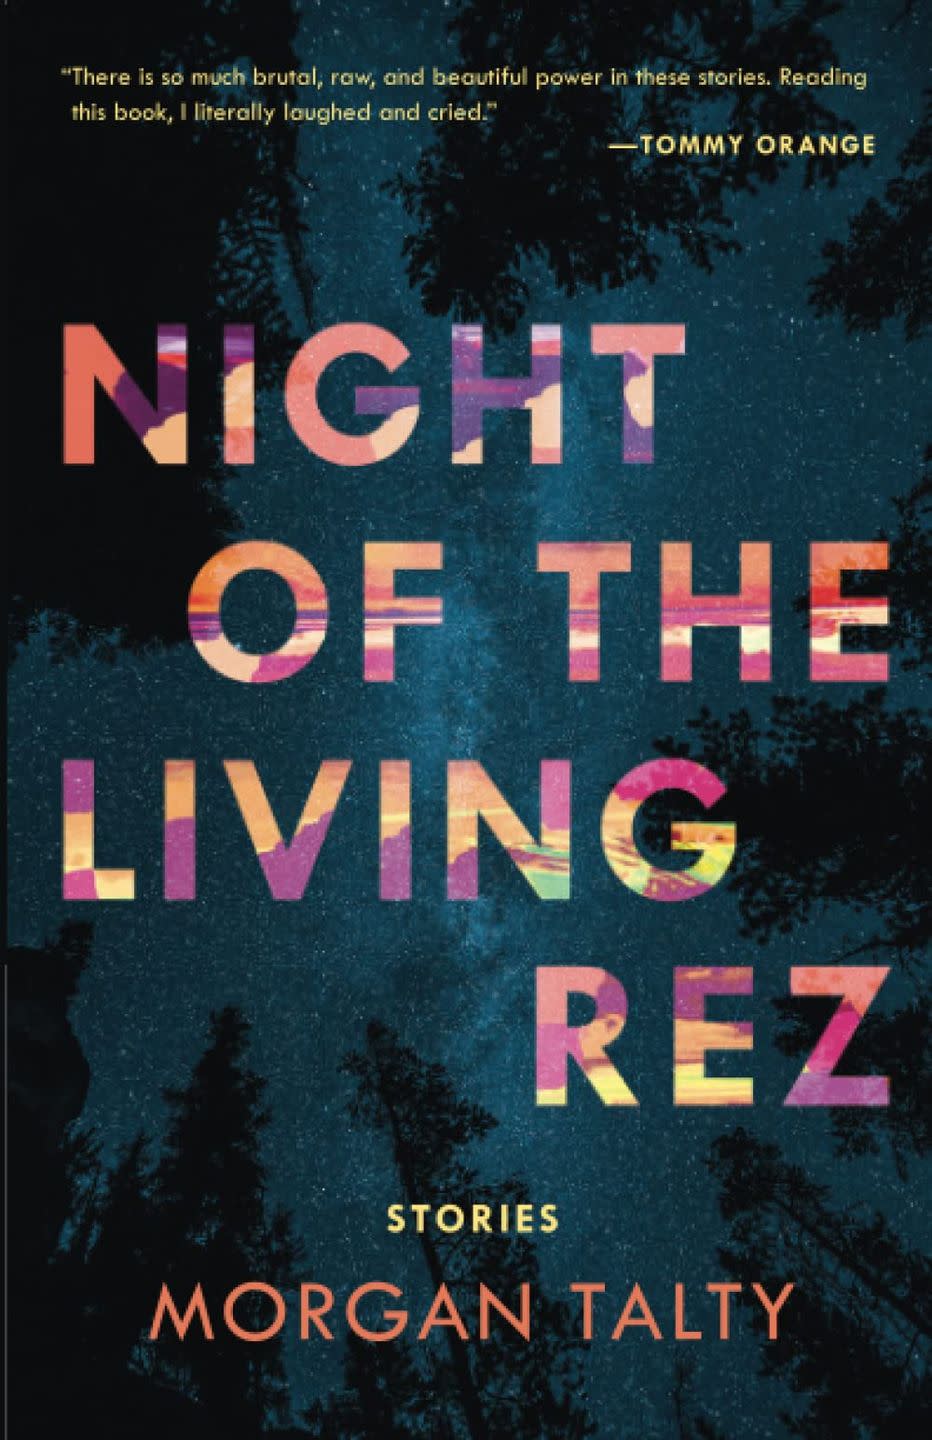 5) 'Night of the Living Rez' by Morgan Talty